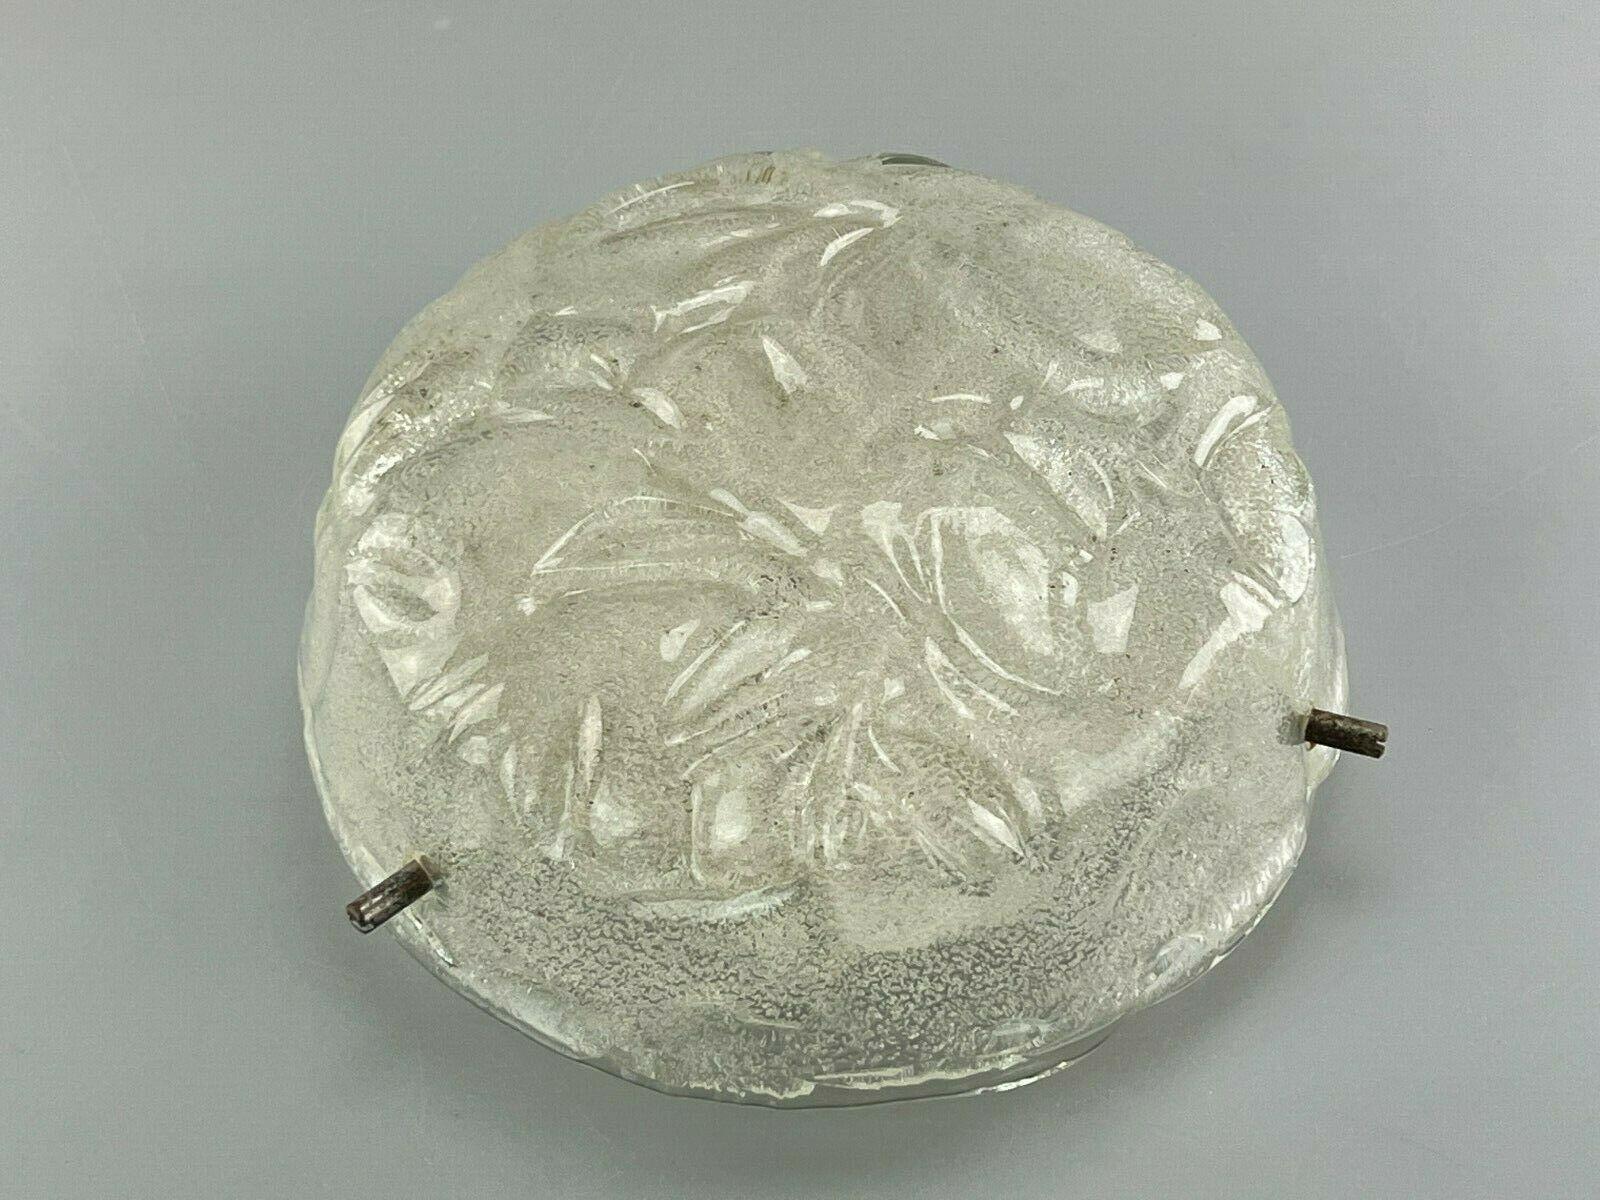 60s 70s Lamp Luminaire Plafoniere Flush Mount Ice Glass Space Age Design

Object: plafoniere

Manufacturer:

Condition: good - vintage

Age: around 1960-1970

Dimensions:

Diameter = 26.5cm
Height = 10cm

Other notes:

The pictures